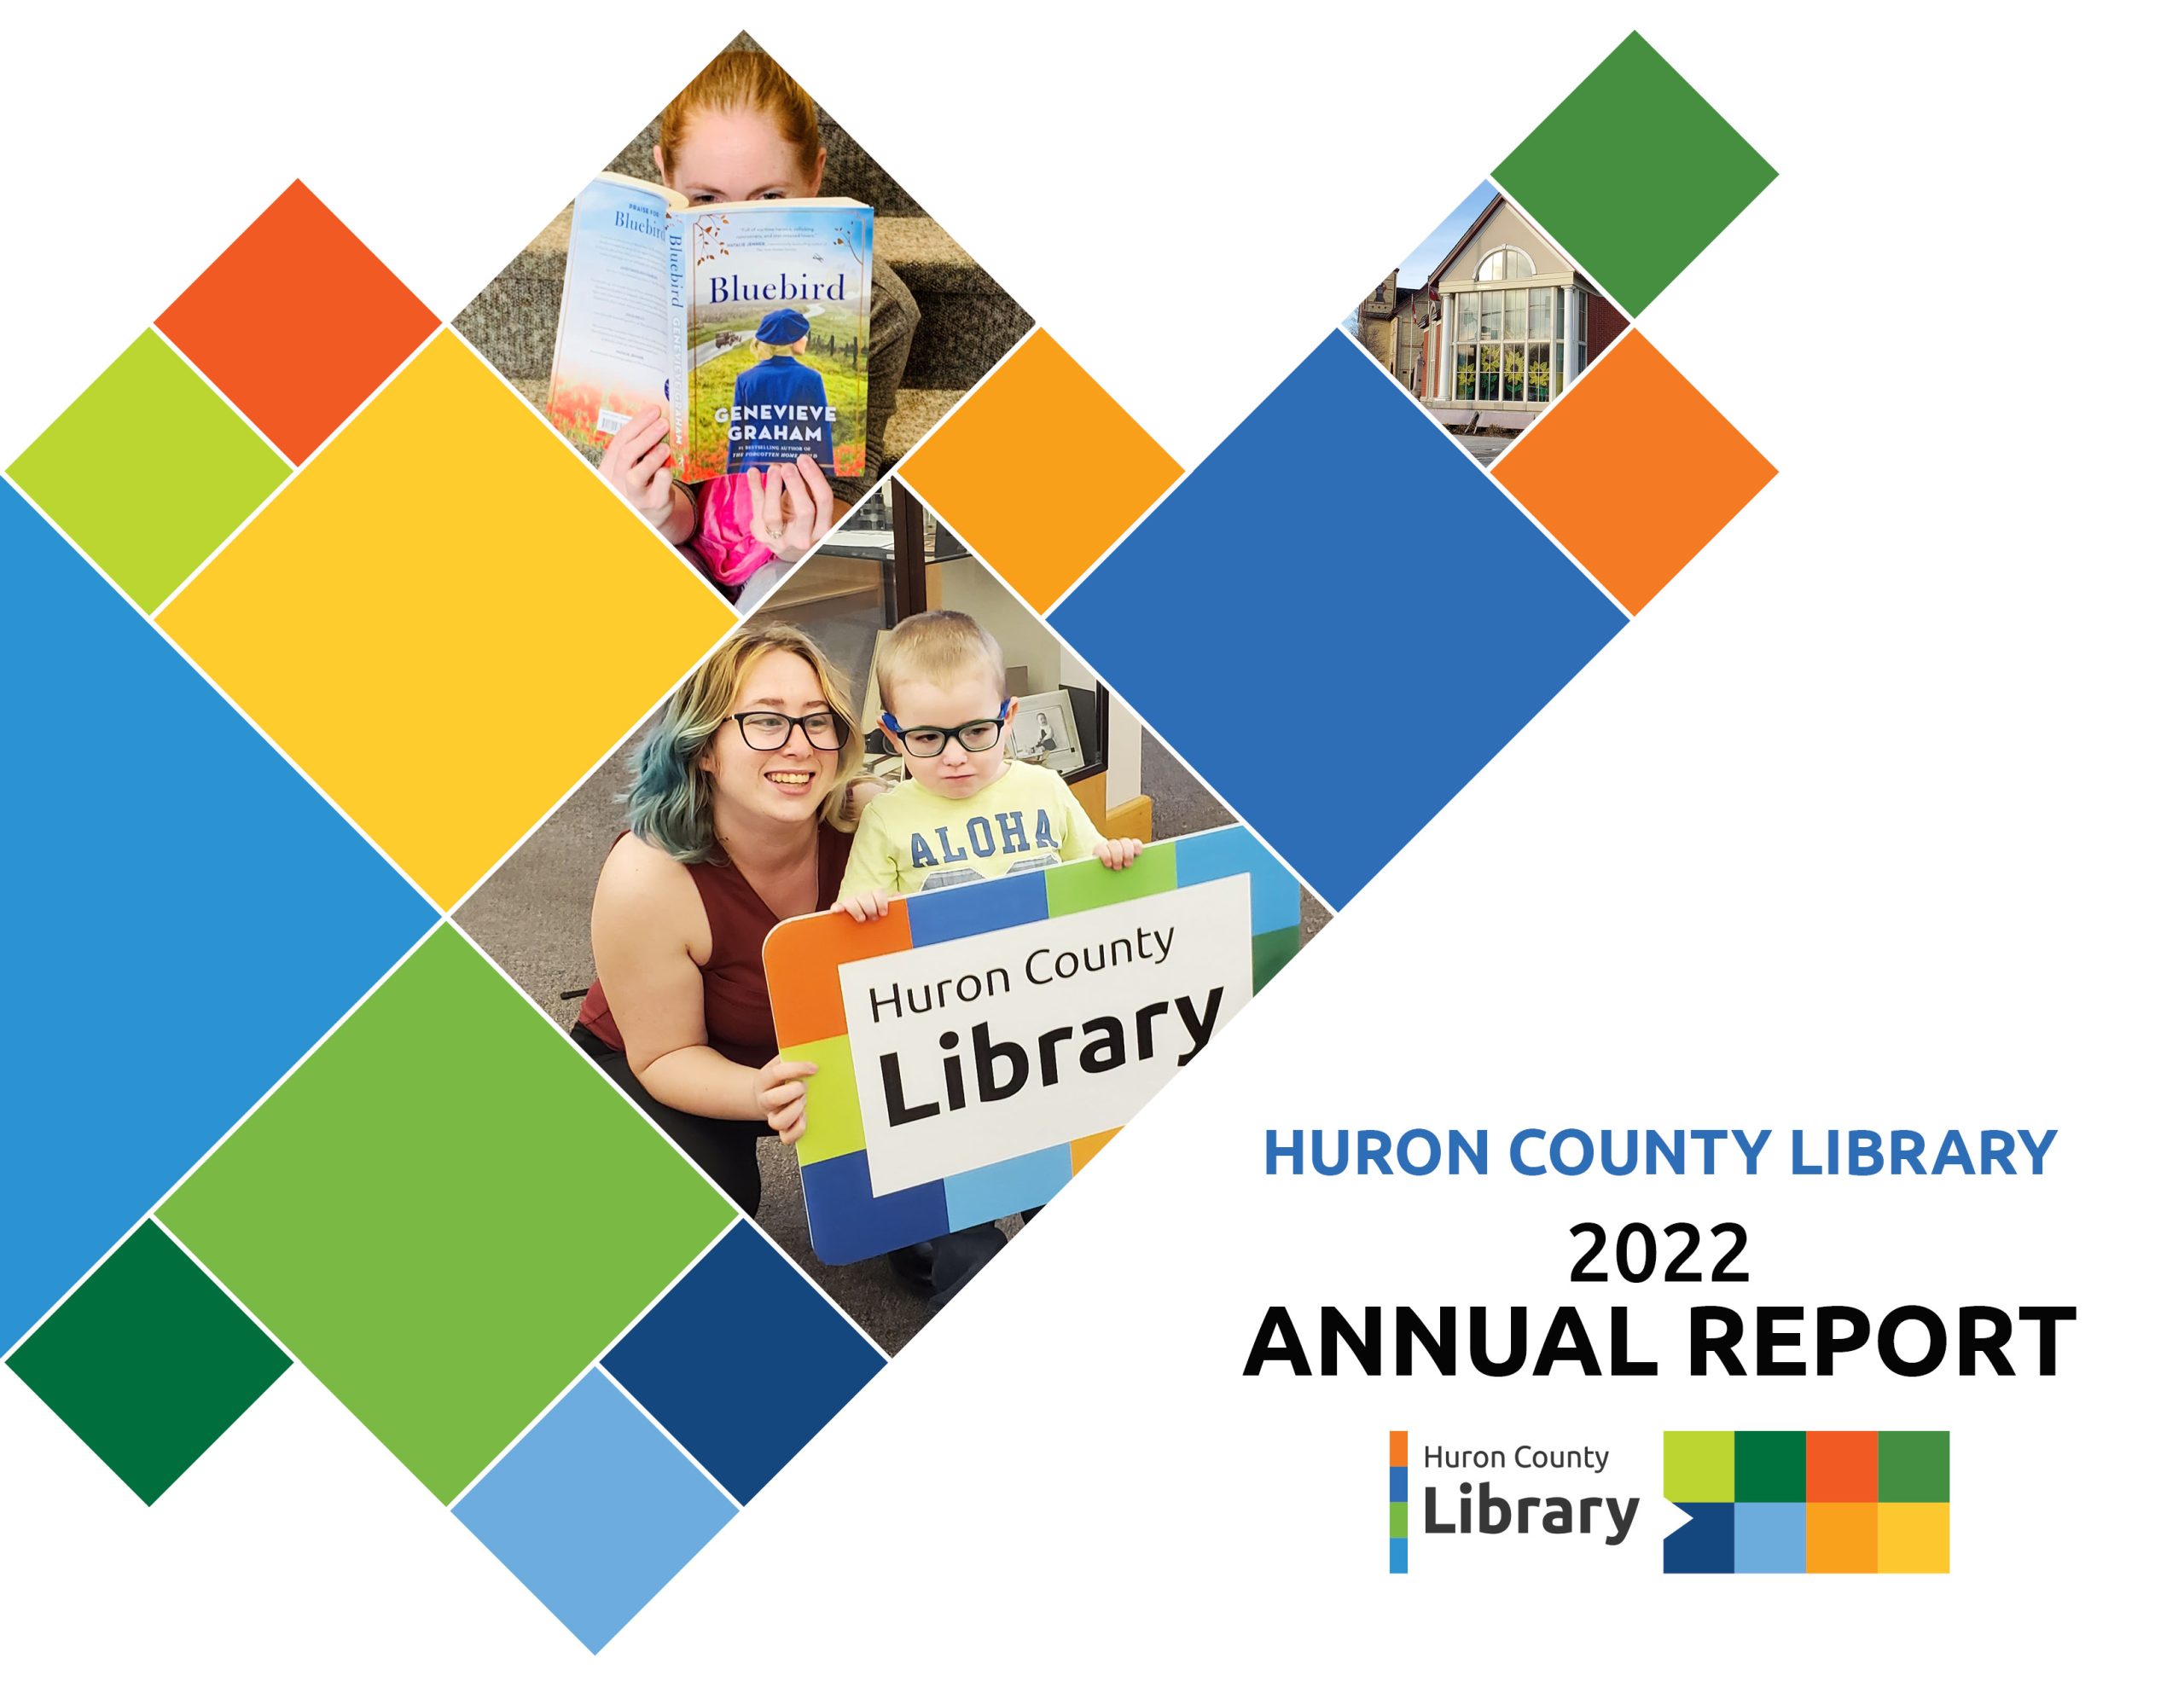 Cover image of the 2022 Huron County Library Annual Report. Featuring different sizes of coloured squares with images from the library